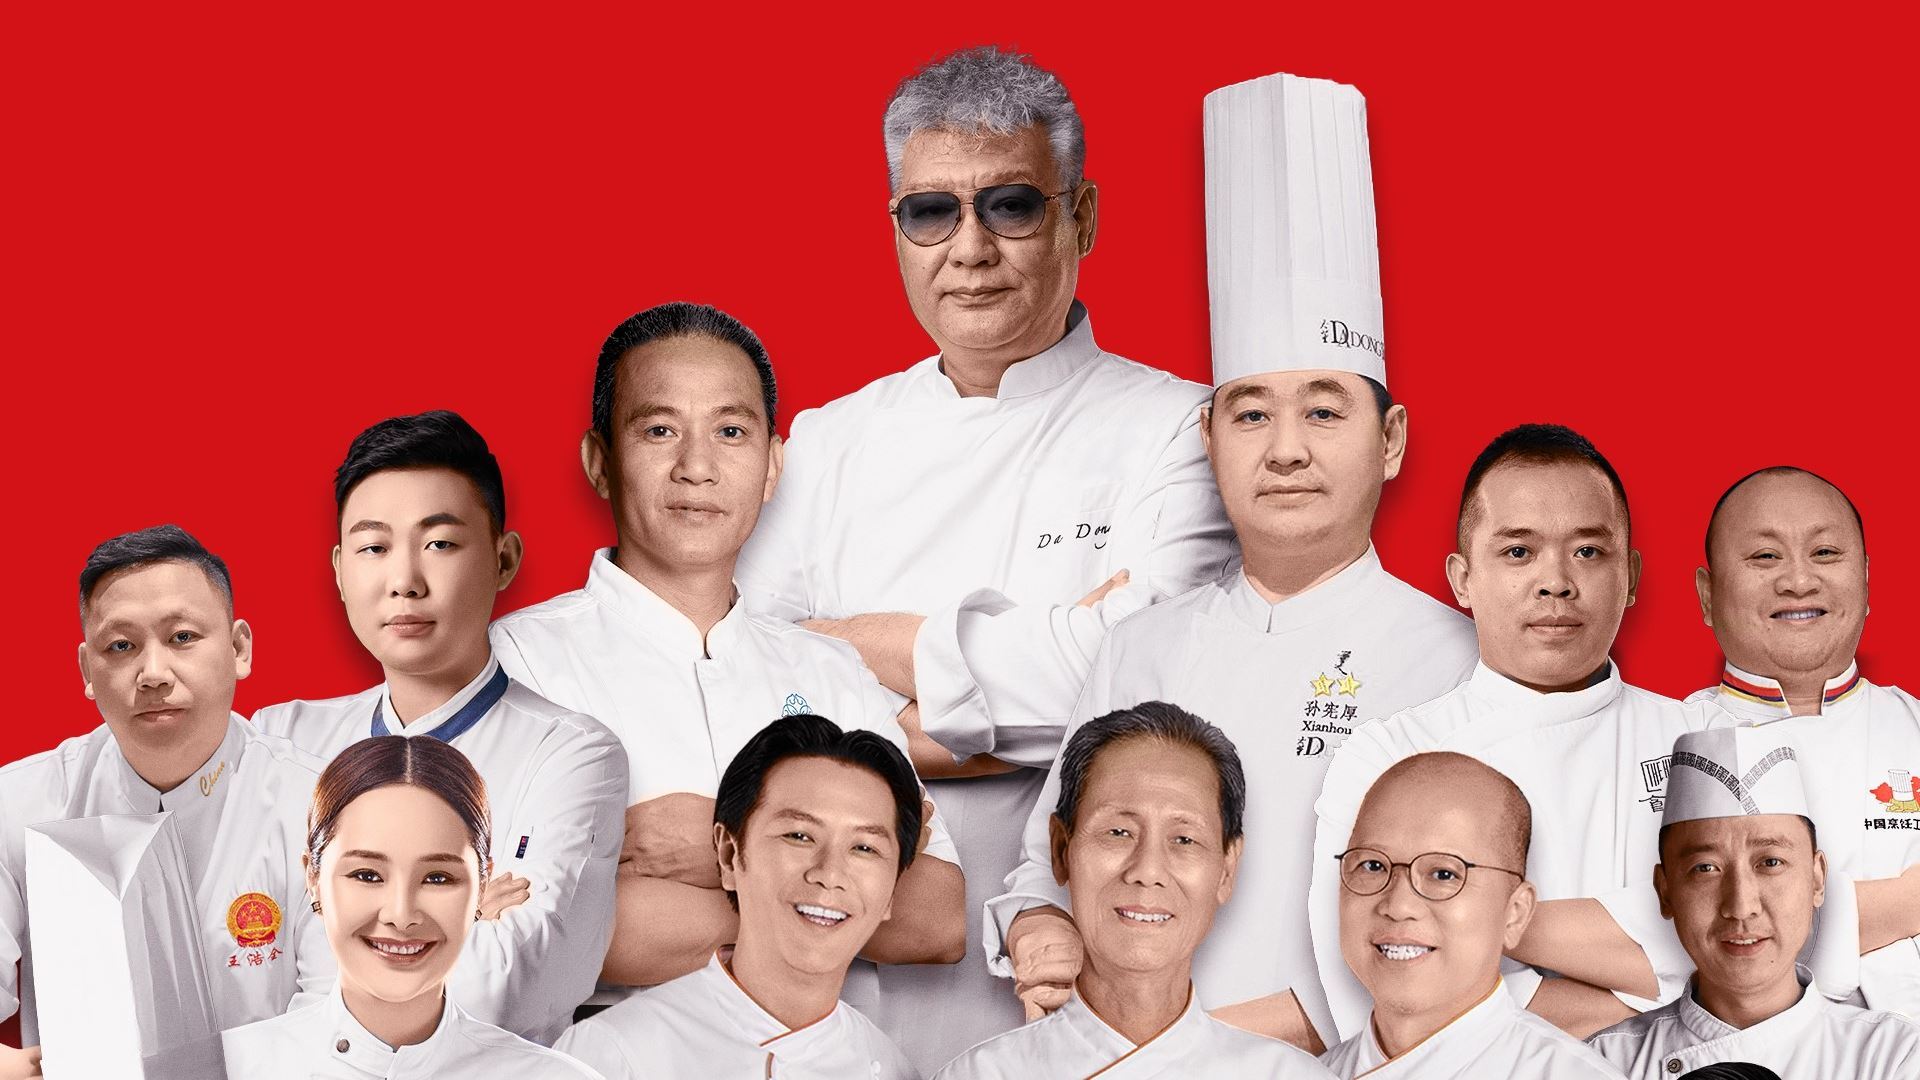 Wynn invites China's leading chefs to exchange ideas and demonstrate their skills at this year's Wynn Guest Chef Series